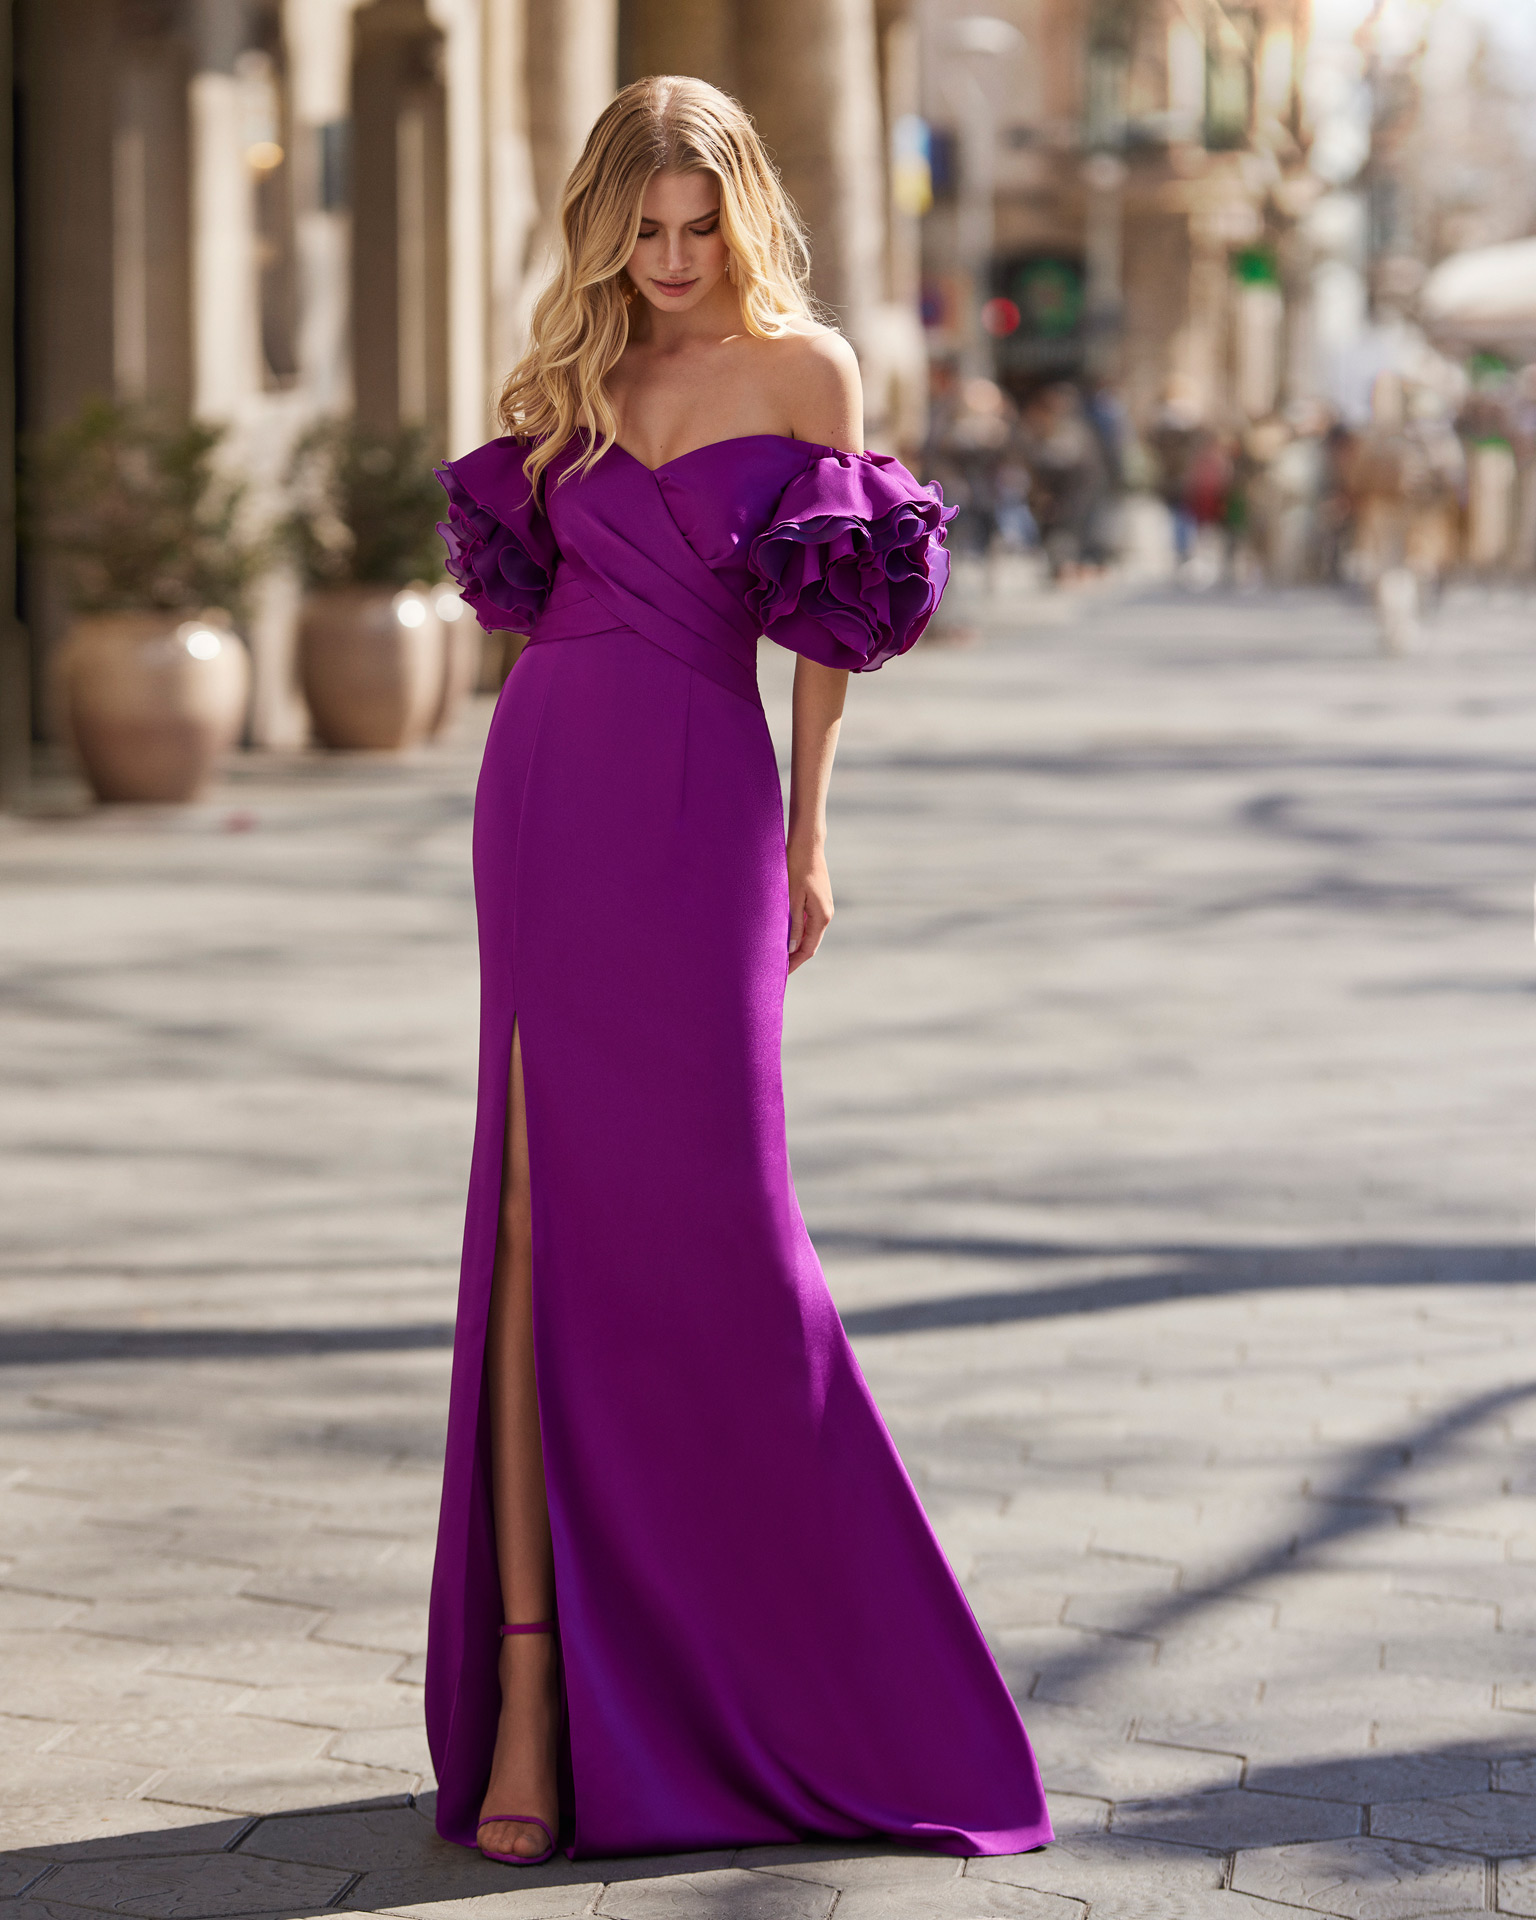 Elegant long evening dress, made of satin crepe. Marfil Barcelona design with a sweetheart neckline and puffed sleeves. MARFIL_BARCELONA.